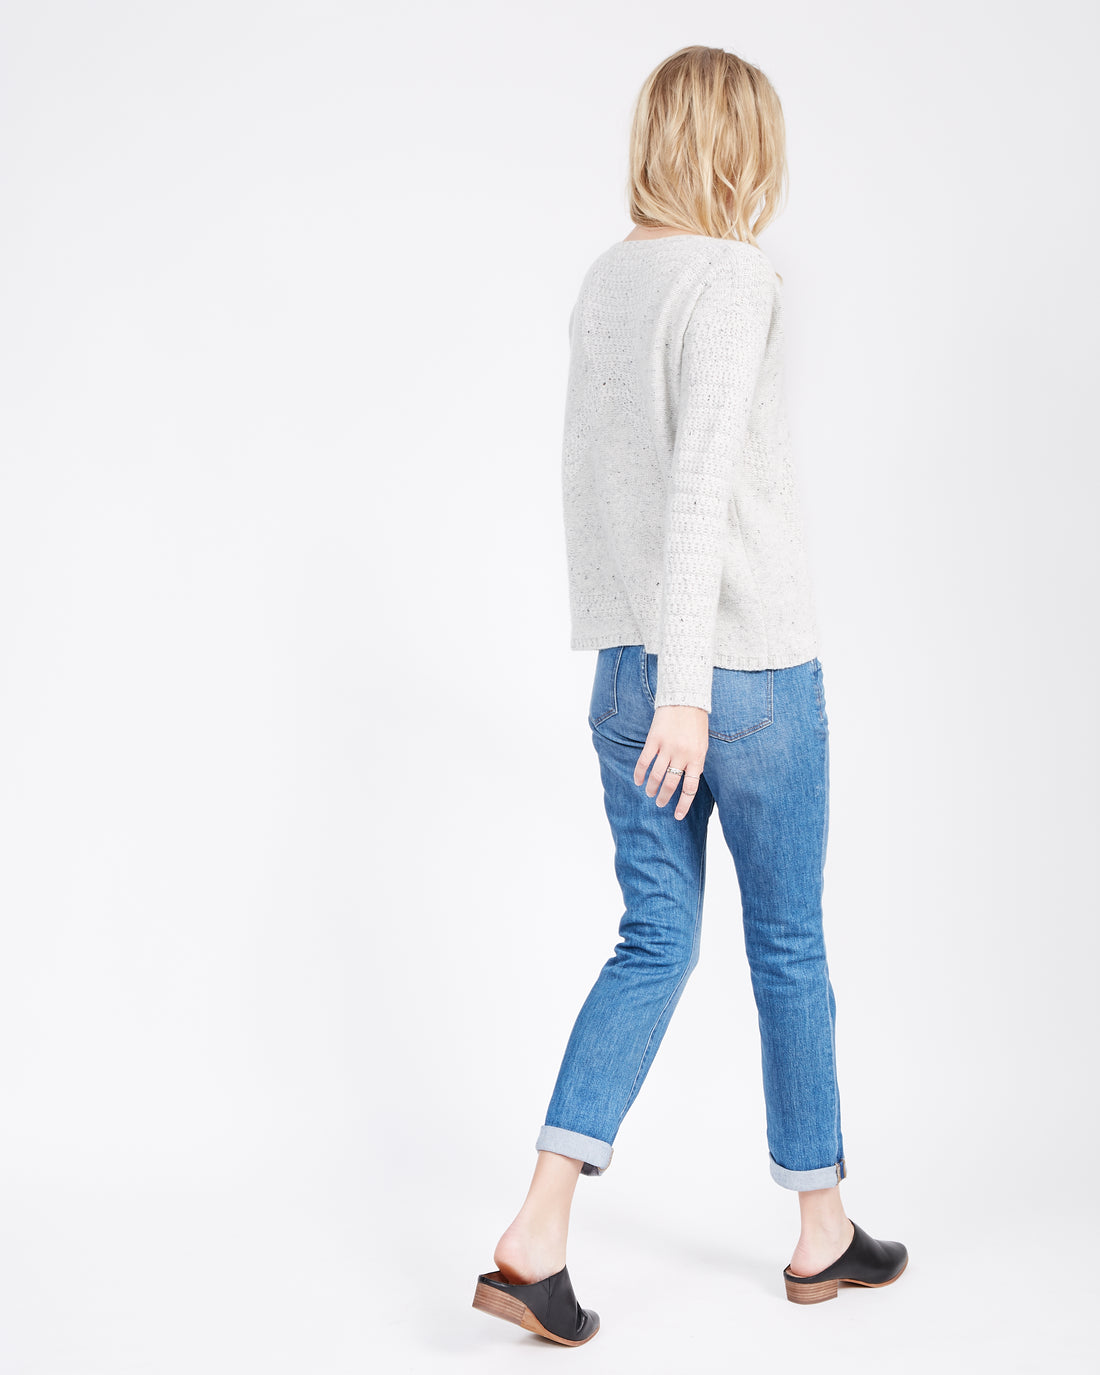 Thick Cashmere Sweater for Winter